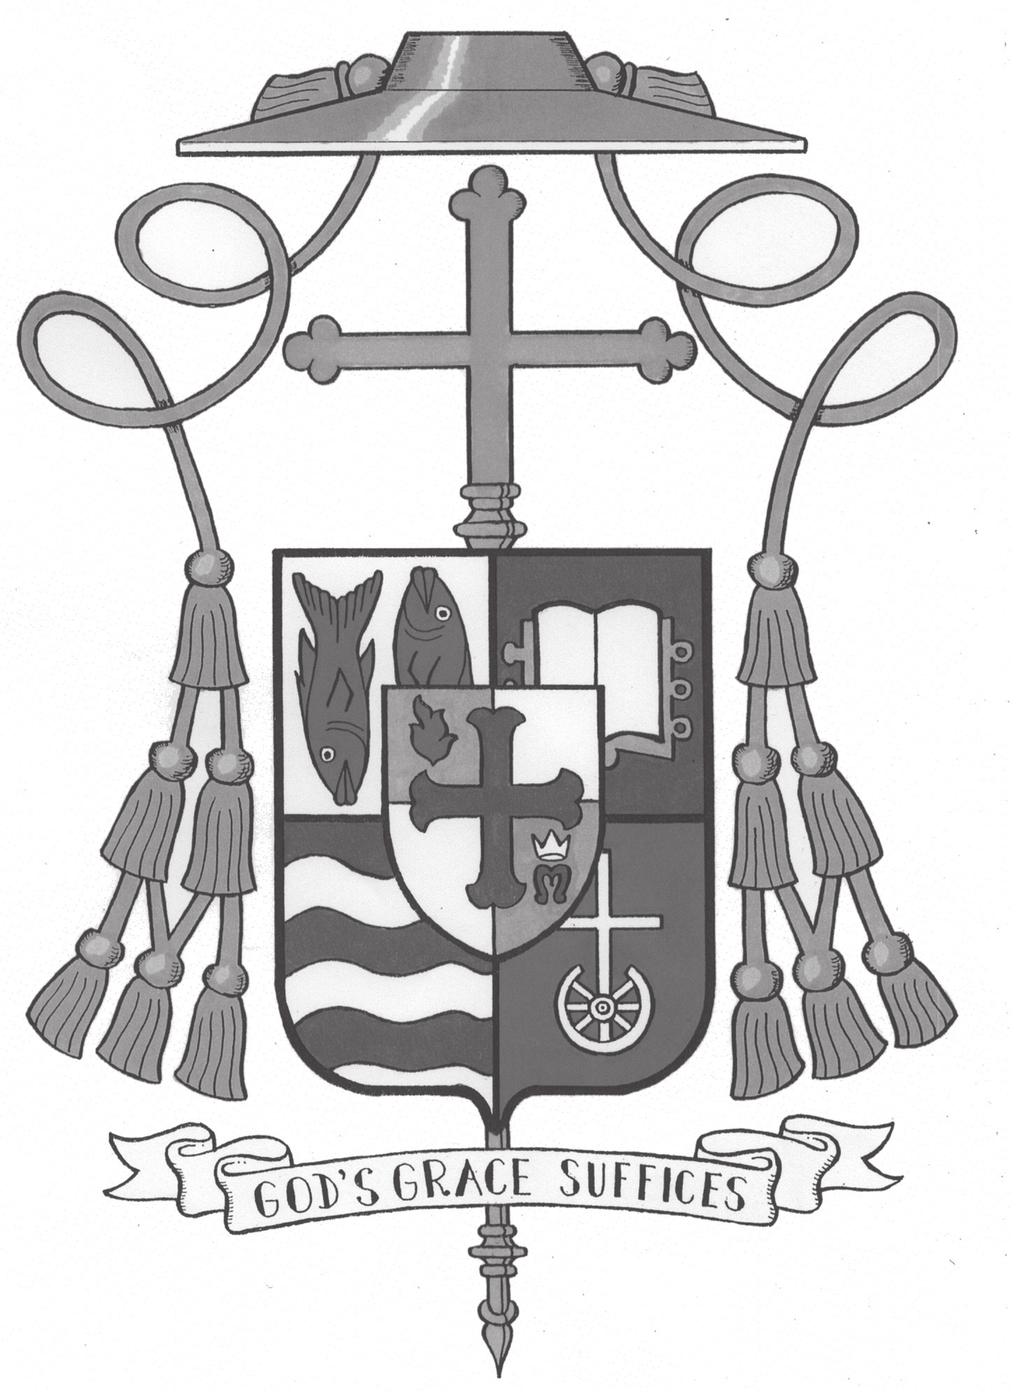 ANNUAL REPORT of the DIOCESE OF METUCHEN Dear Sisters and Brothers, Each year, I ask all clergy, religious and laypersons of the Diocese of Metuchen to support the Bishop s Annual Appeal, which funds